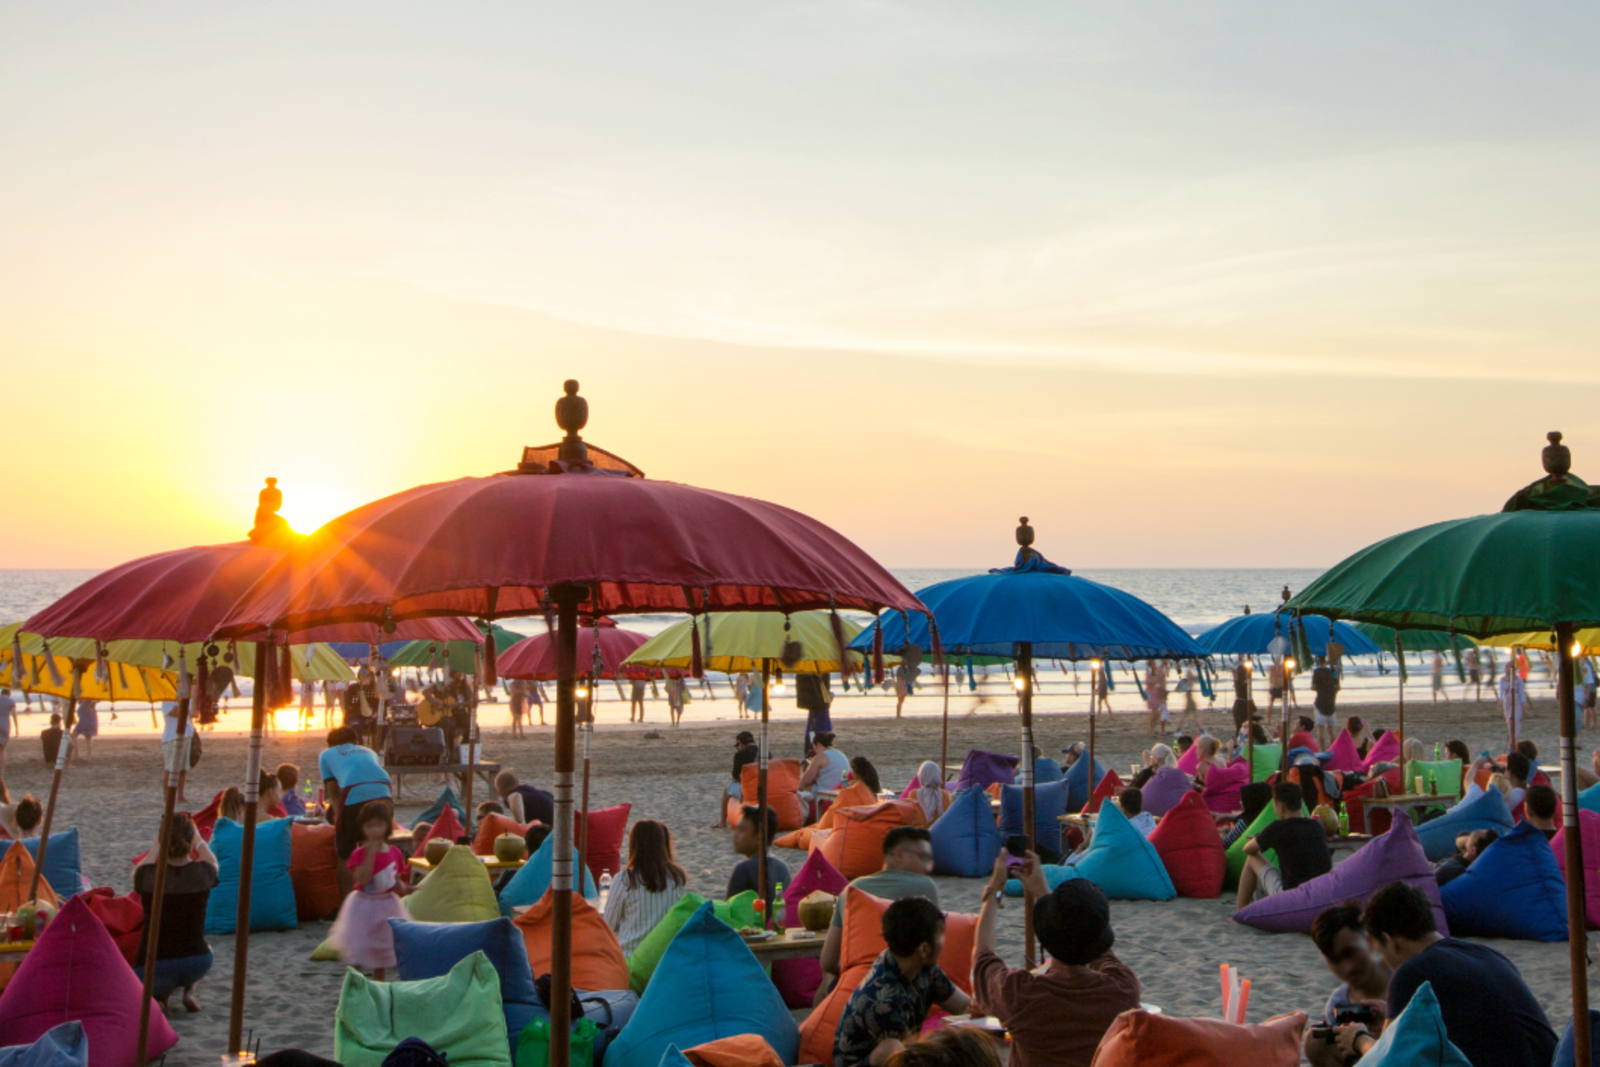 Seminyak Beach is one of the most popular beaches in Bali